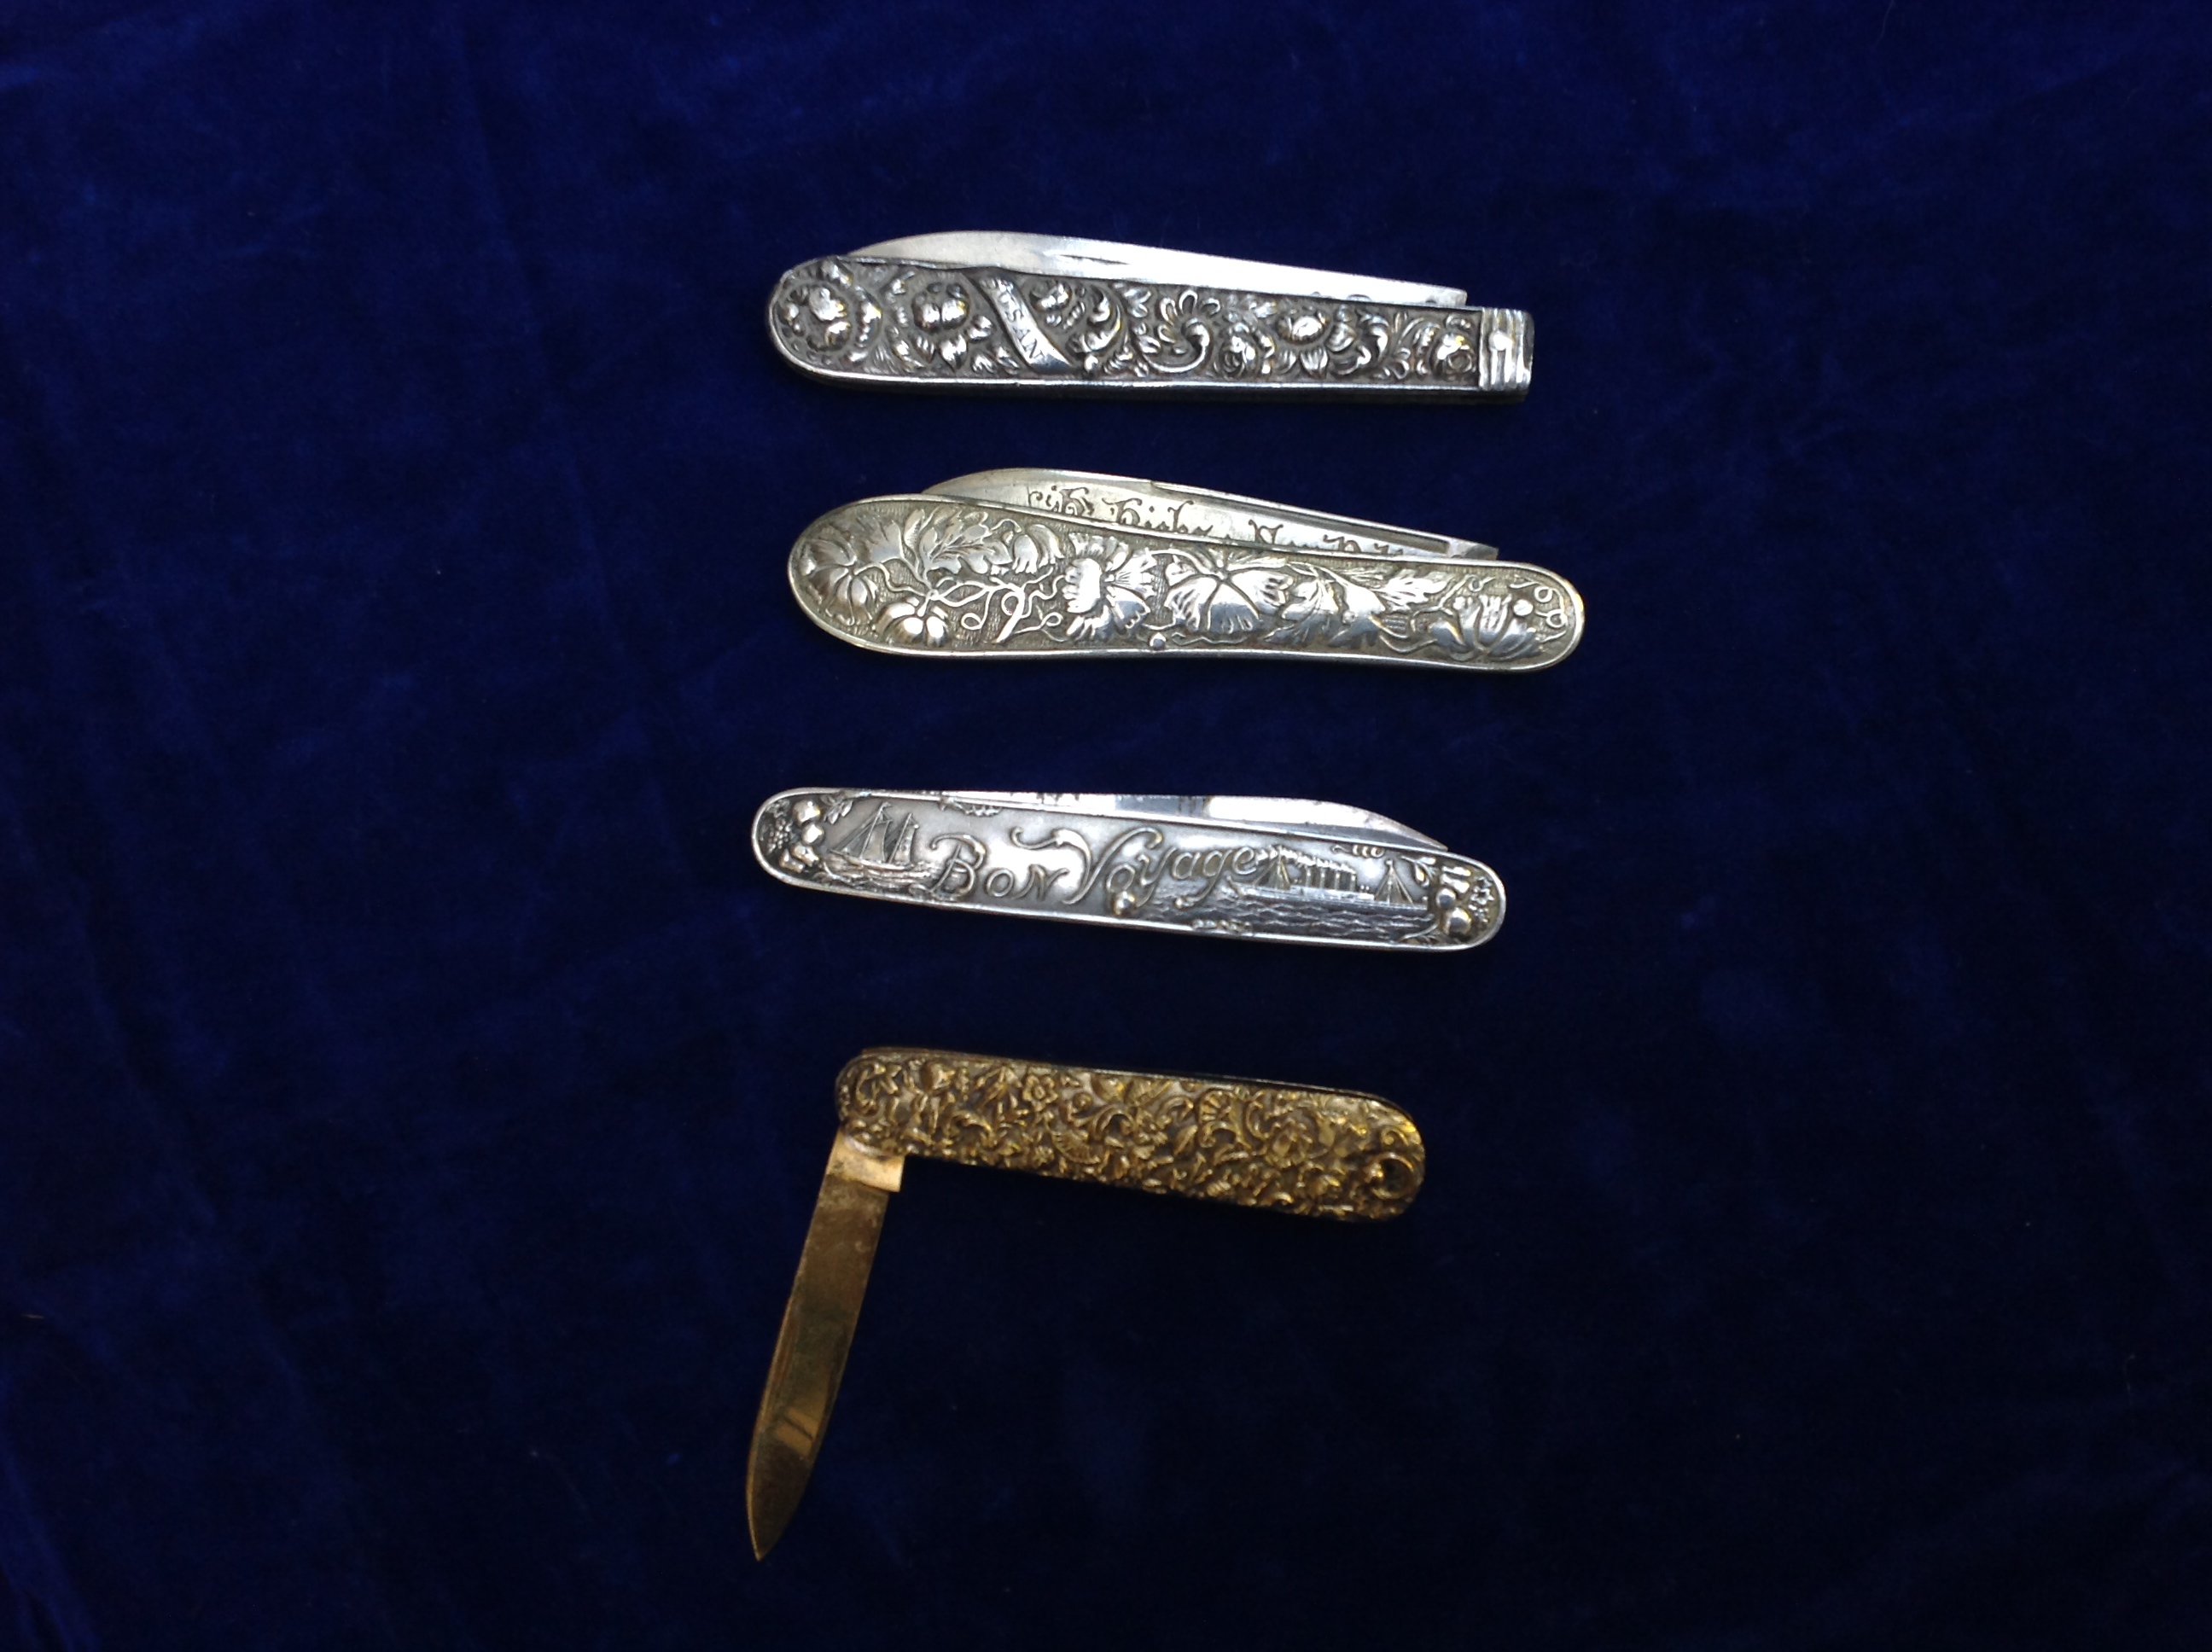 THREE 19TH CENTURY SILVER PENKNIVES  With repoussé handles, along with a gilt metal penknife.